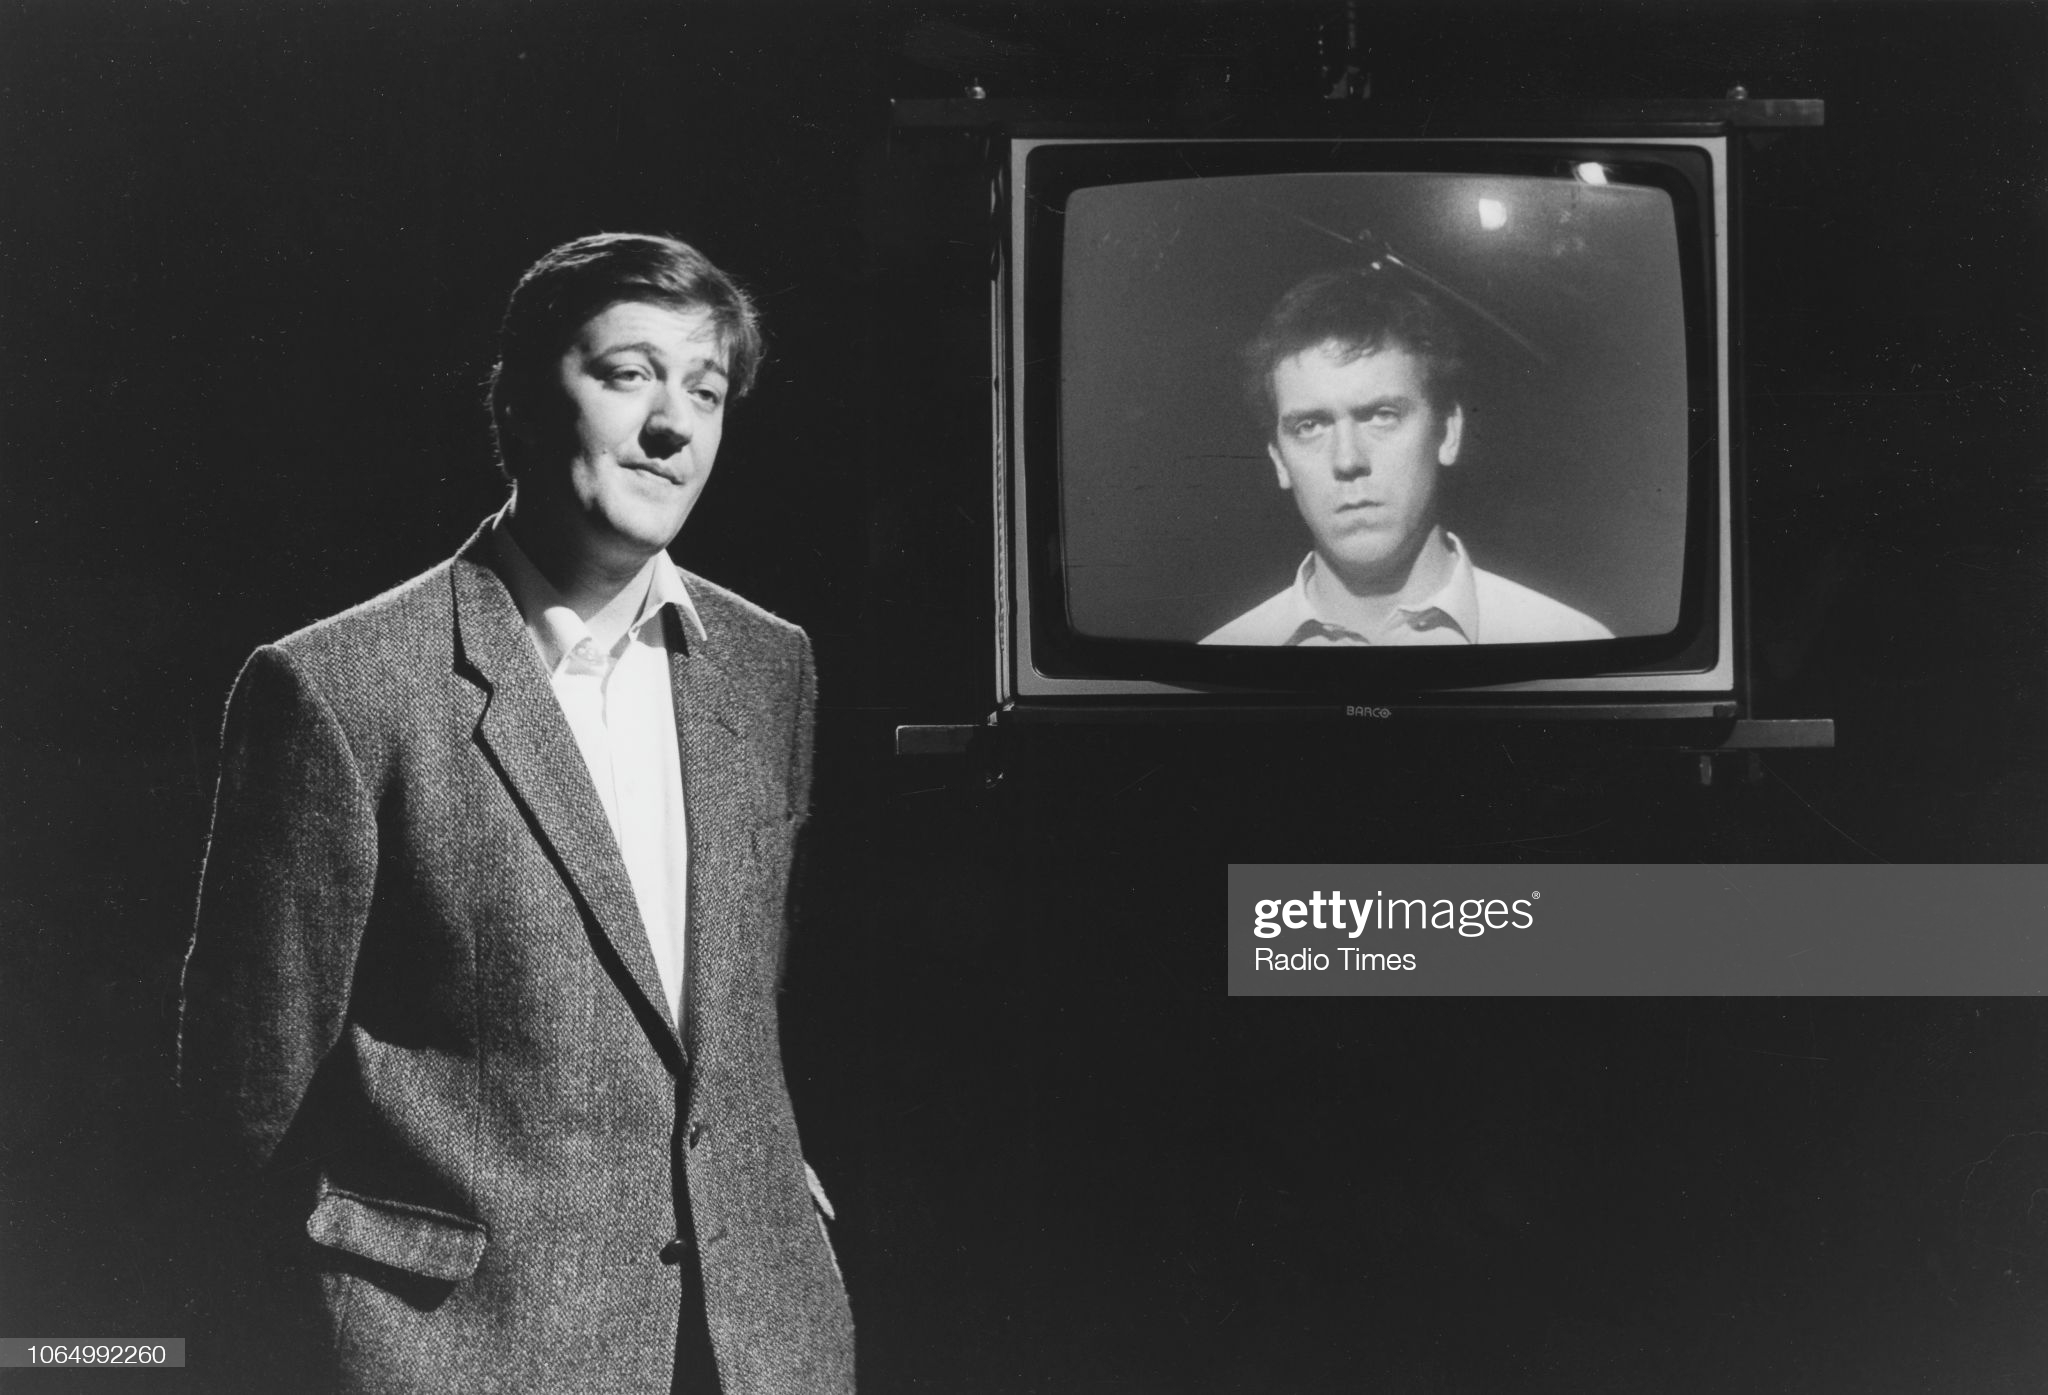 Comic actors Stephen Fry (left) and Hugh Laurie (on a television screen) on the set of a television show, December 17th 1988. (Photo by Don Smith/Radio Times/Getty Images)